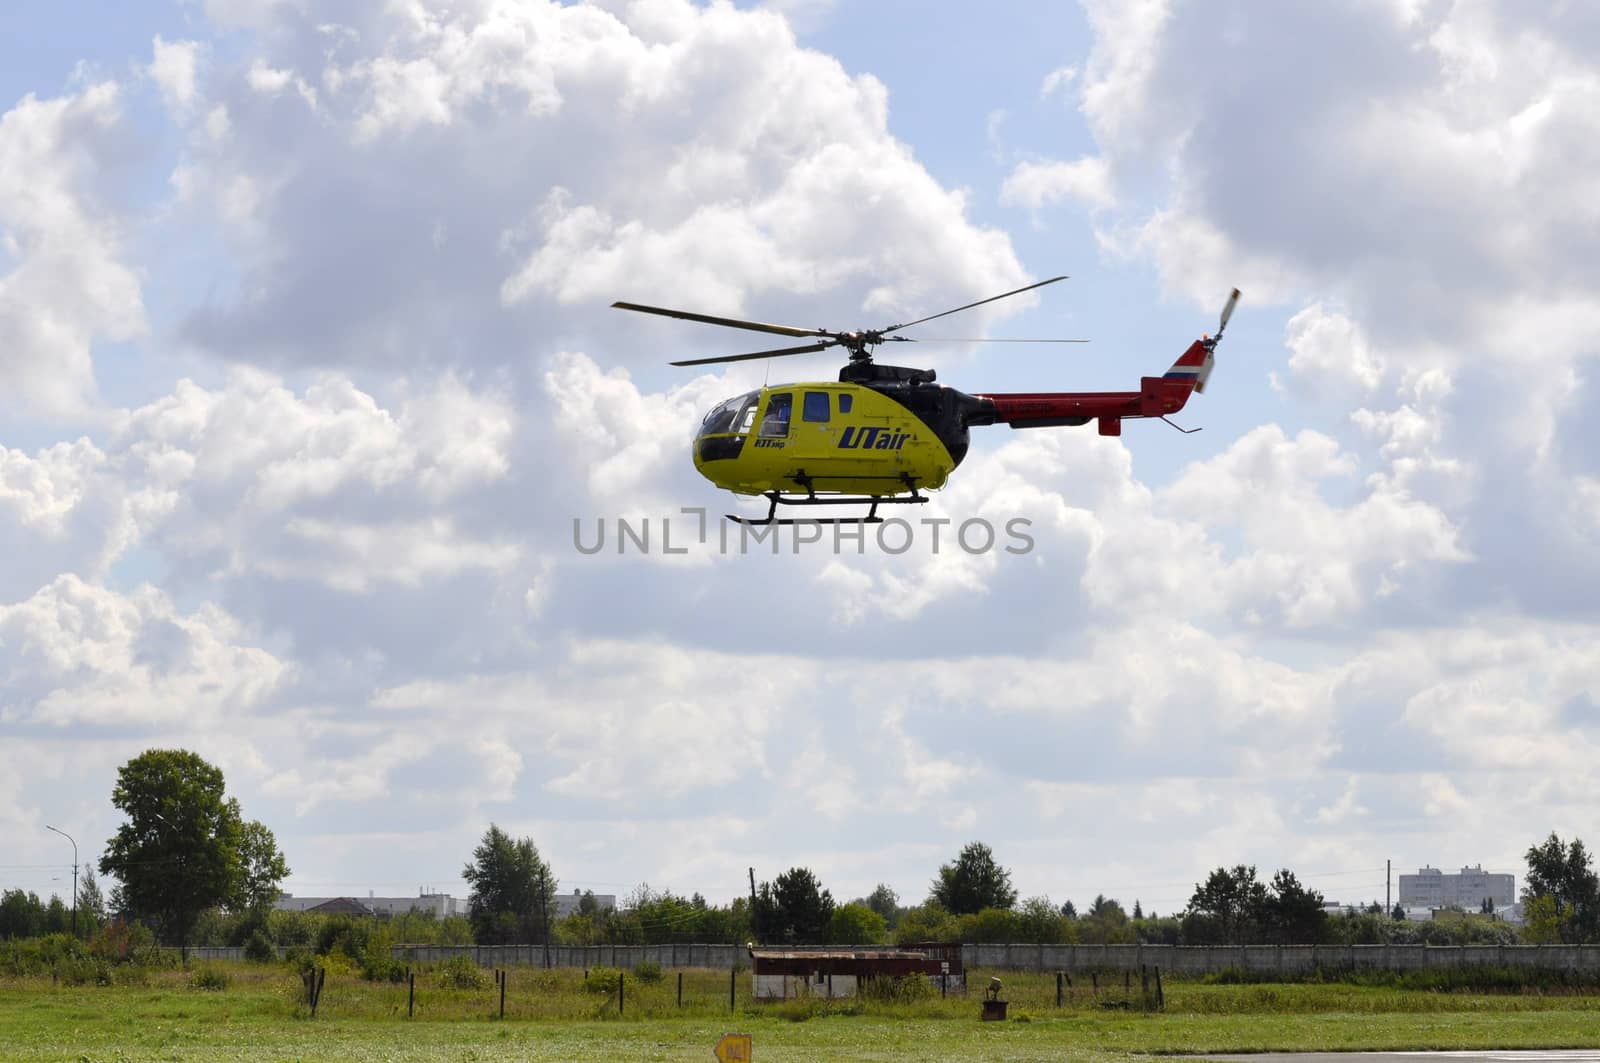 The small yellow helicopter of Utair airline in the sky. by veronka72